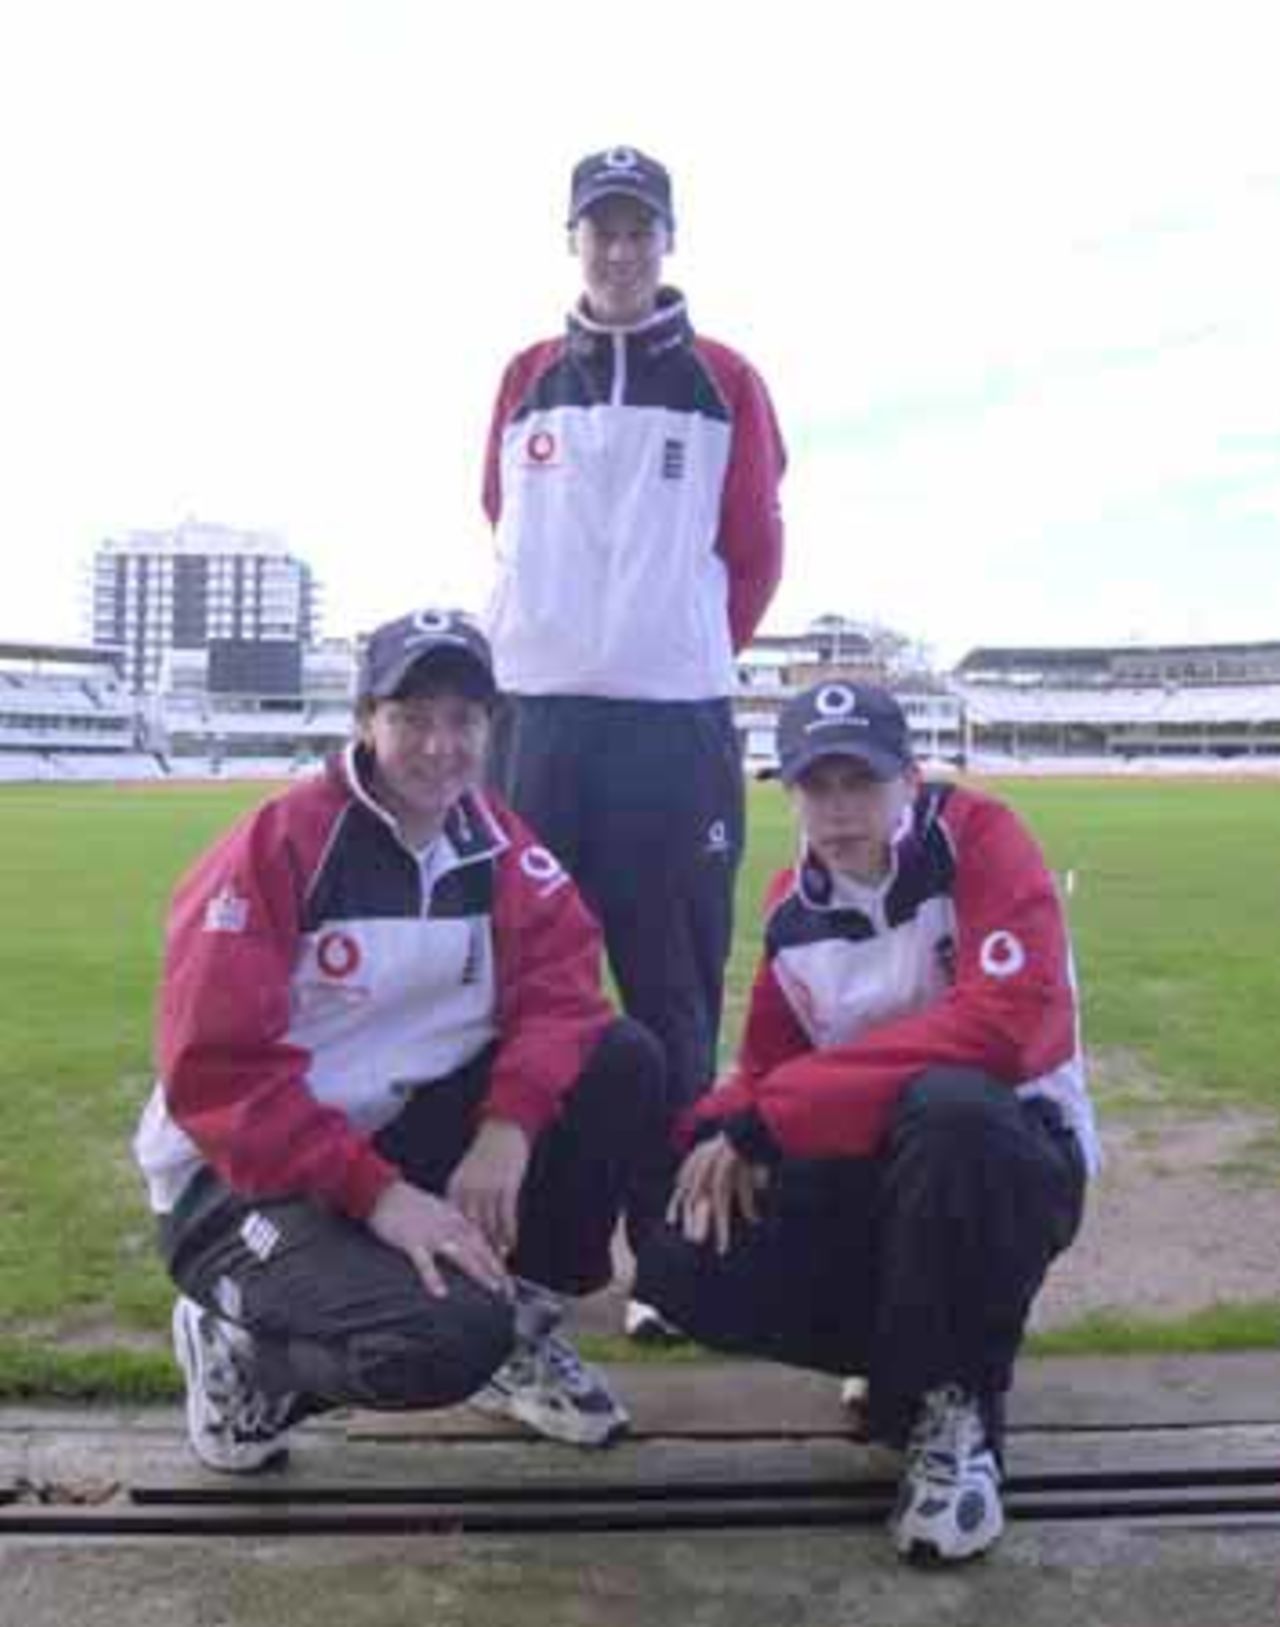 England team members at Lord's on the day of departure for the World Cup in New Zealand